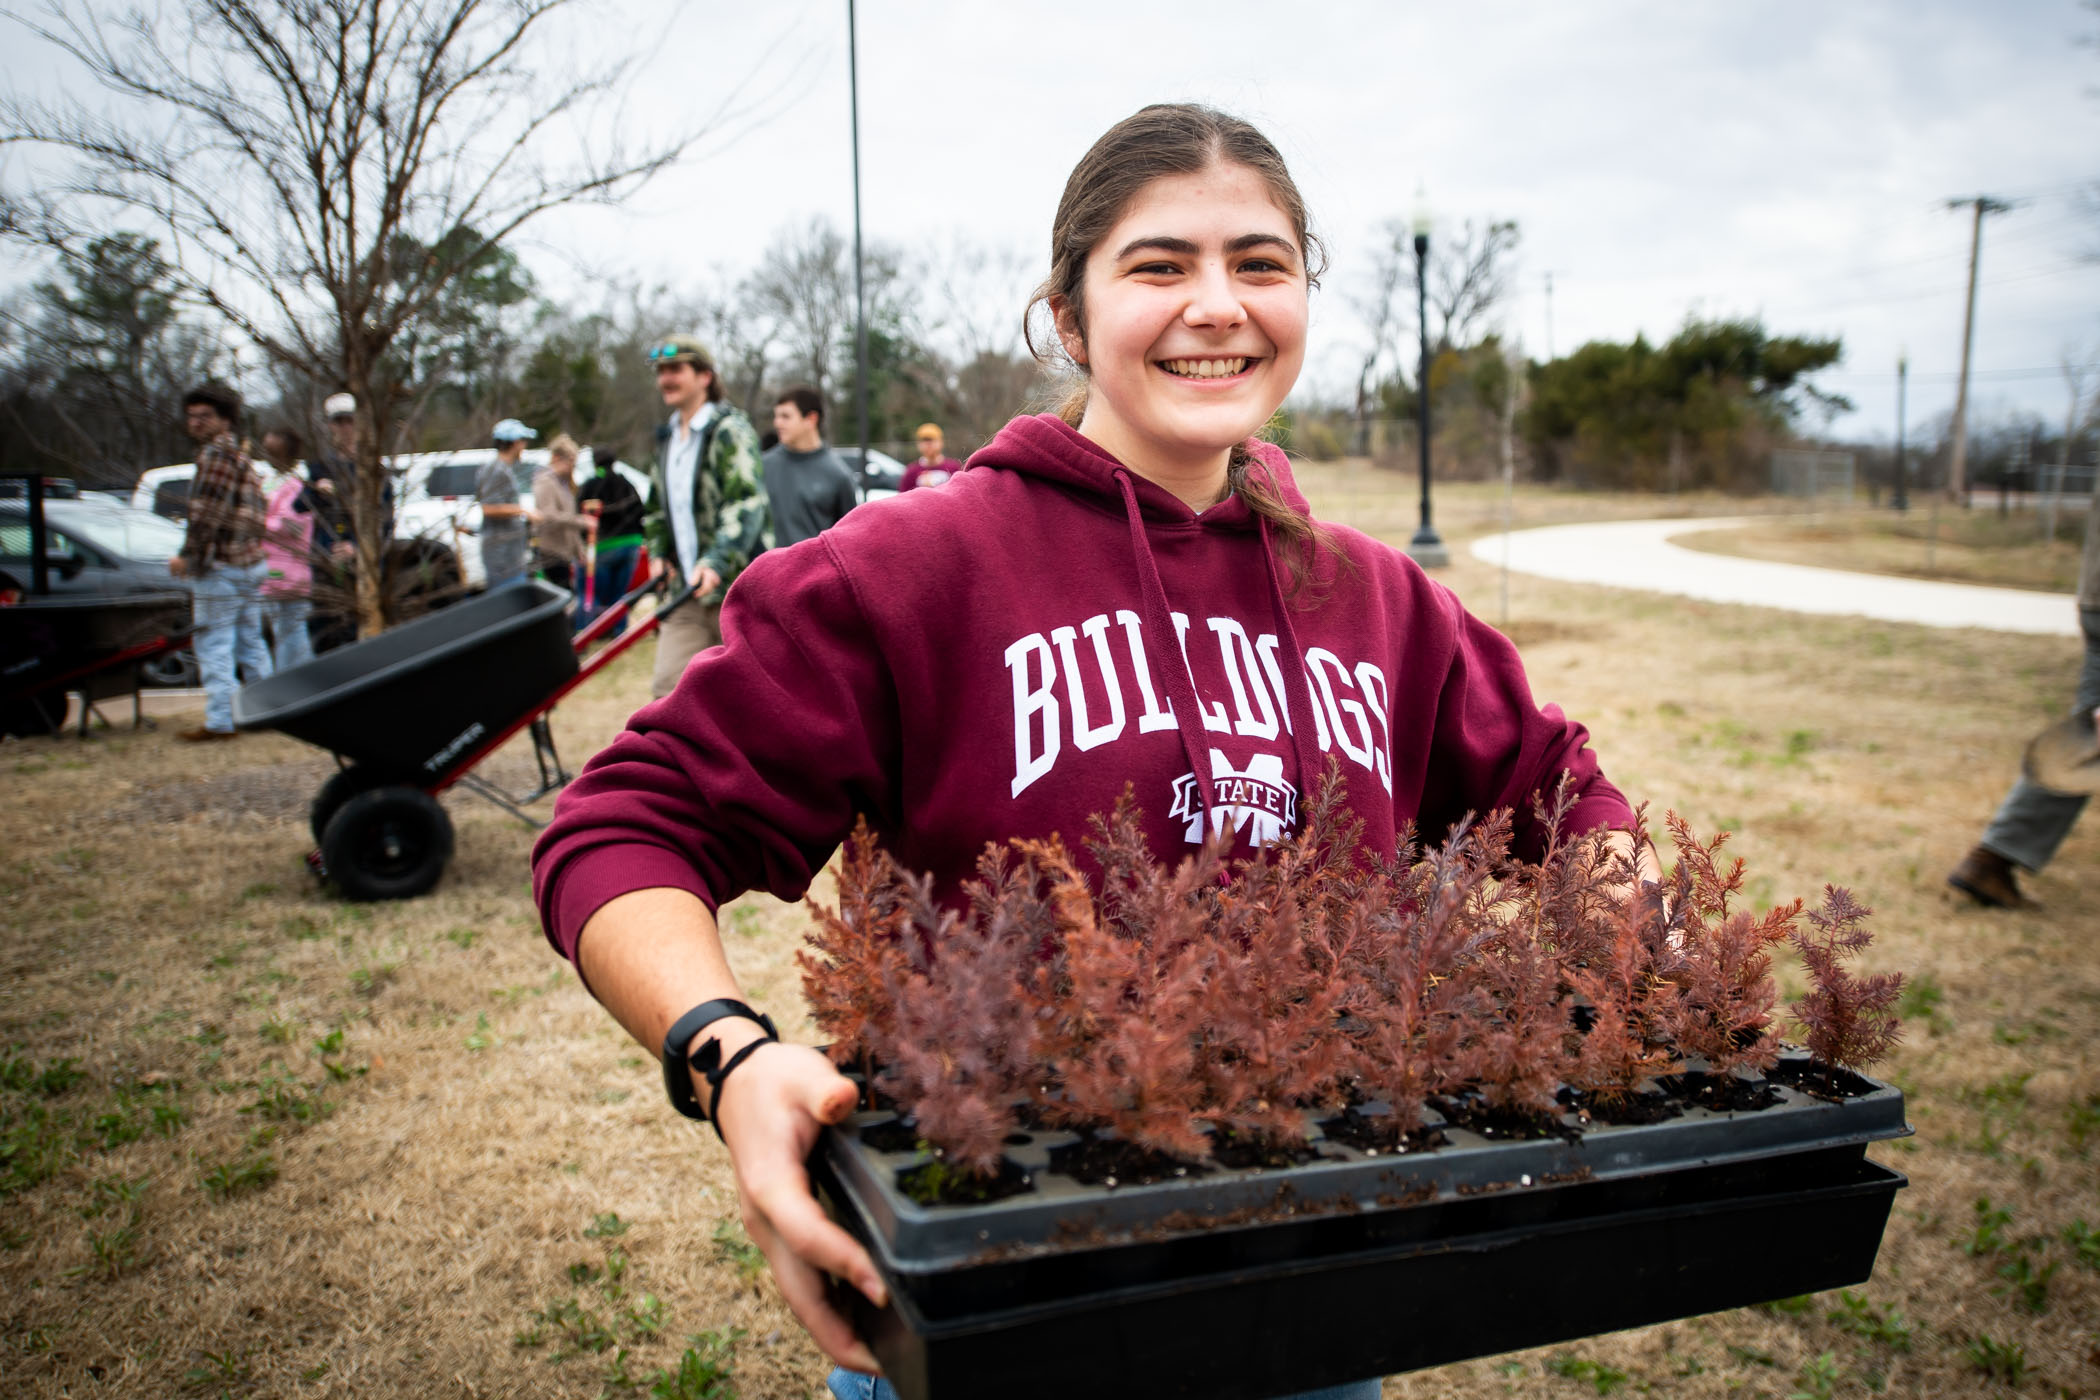 MSU faculty, staff and students join together to celebrate Arbor Day and the university’s 12th year as a Tree Campus Higher Education designation by planting nearly 140 large hardwoods along the walkway behind College View Apartments